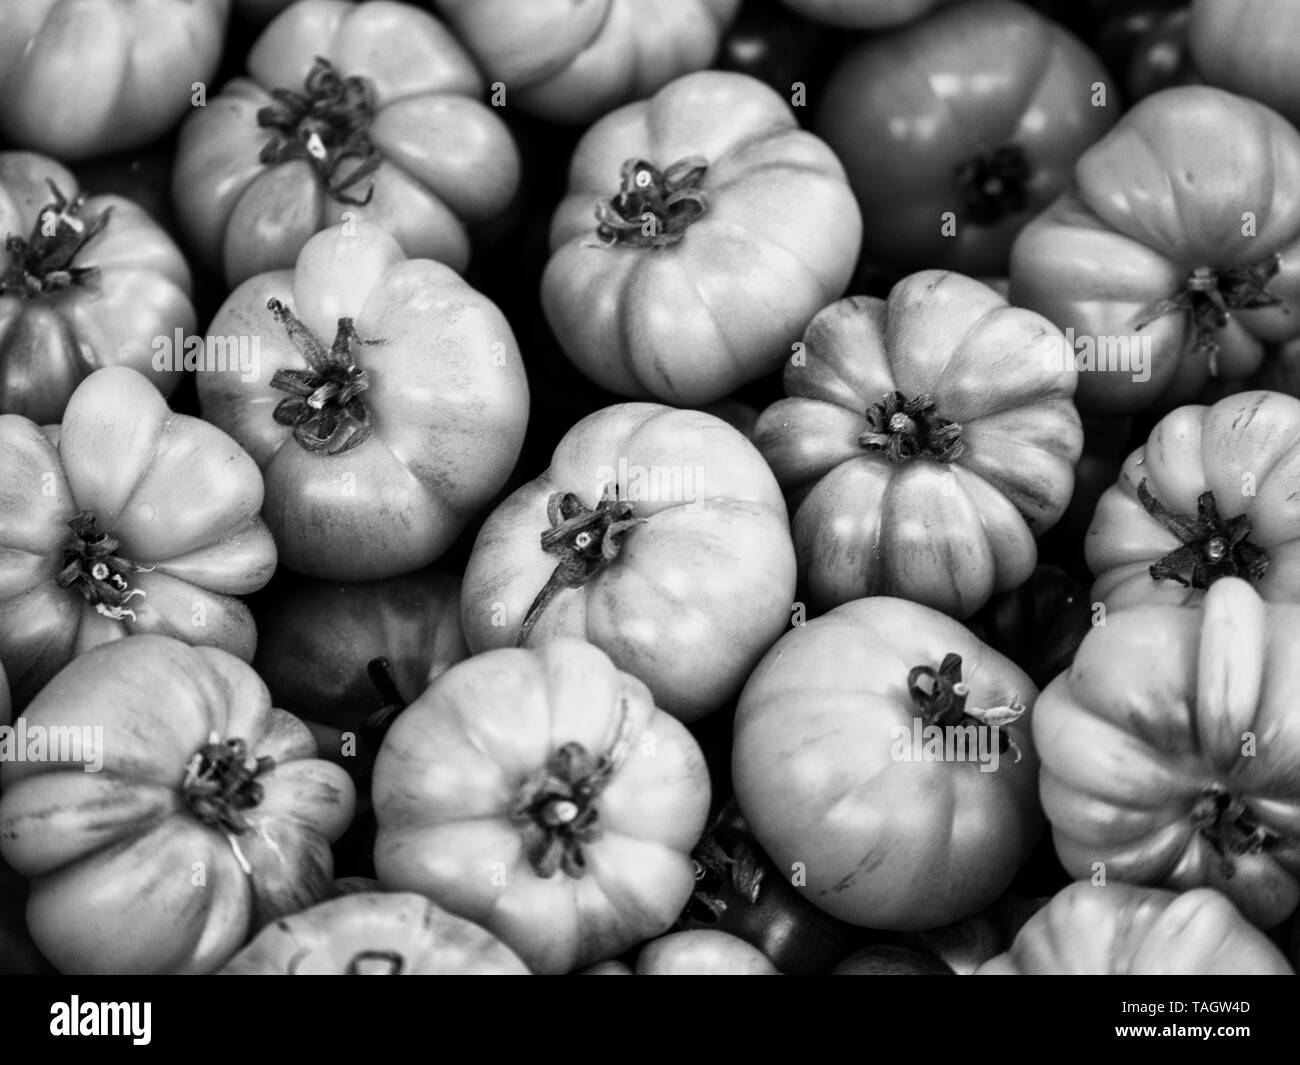 Black and white close up view on fresh organic meat tomatoes at a market Stock Photo